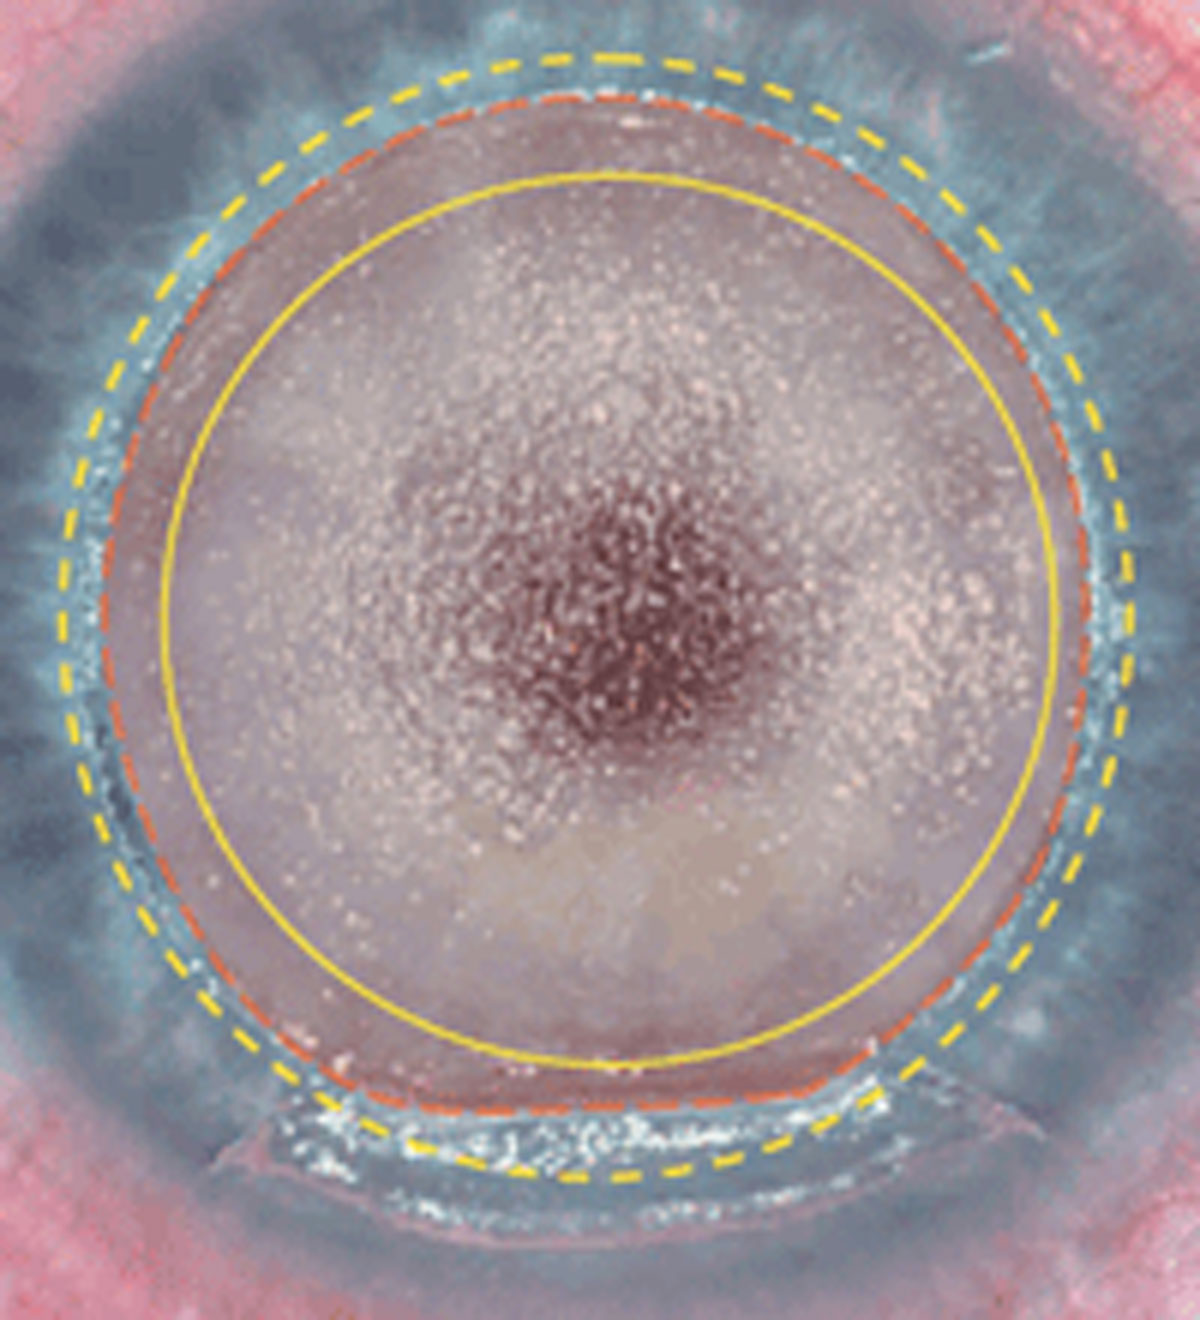 LASIK reduces dendritic cell density in the central cornea, creating a stimulus for cellular migration to the area. These changes may manifest clinically as ocular surface disruption and pain long after the surgery.